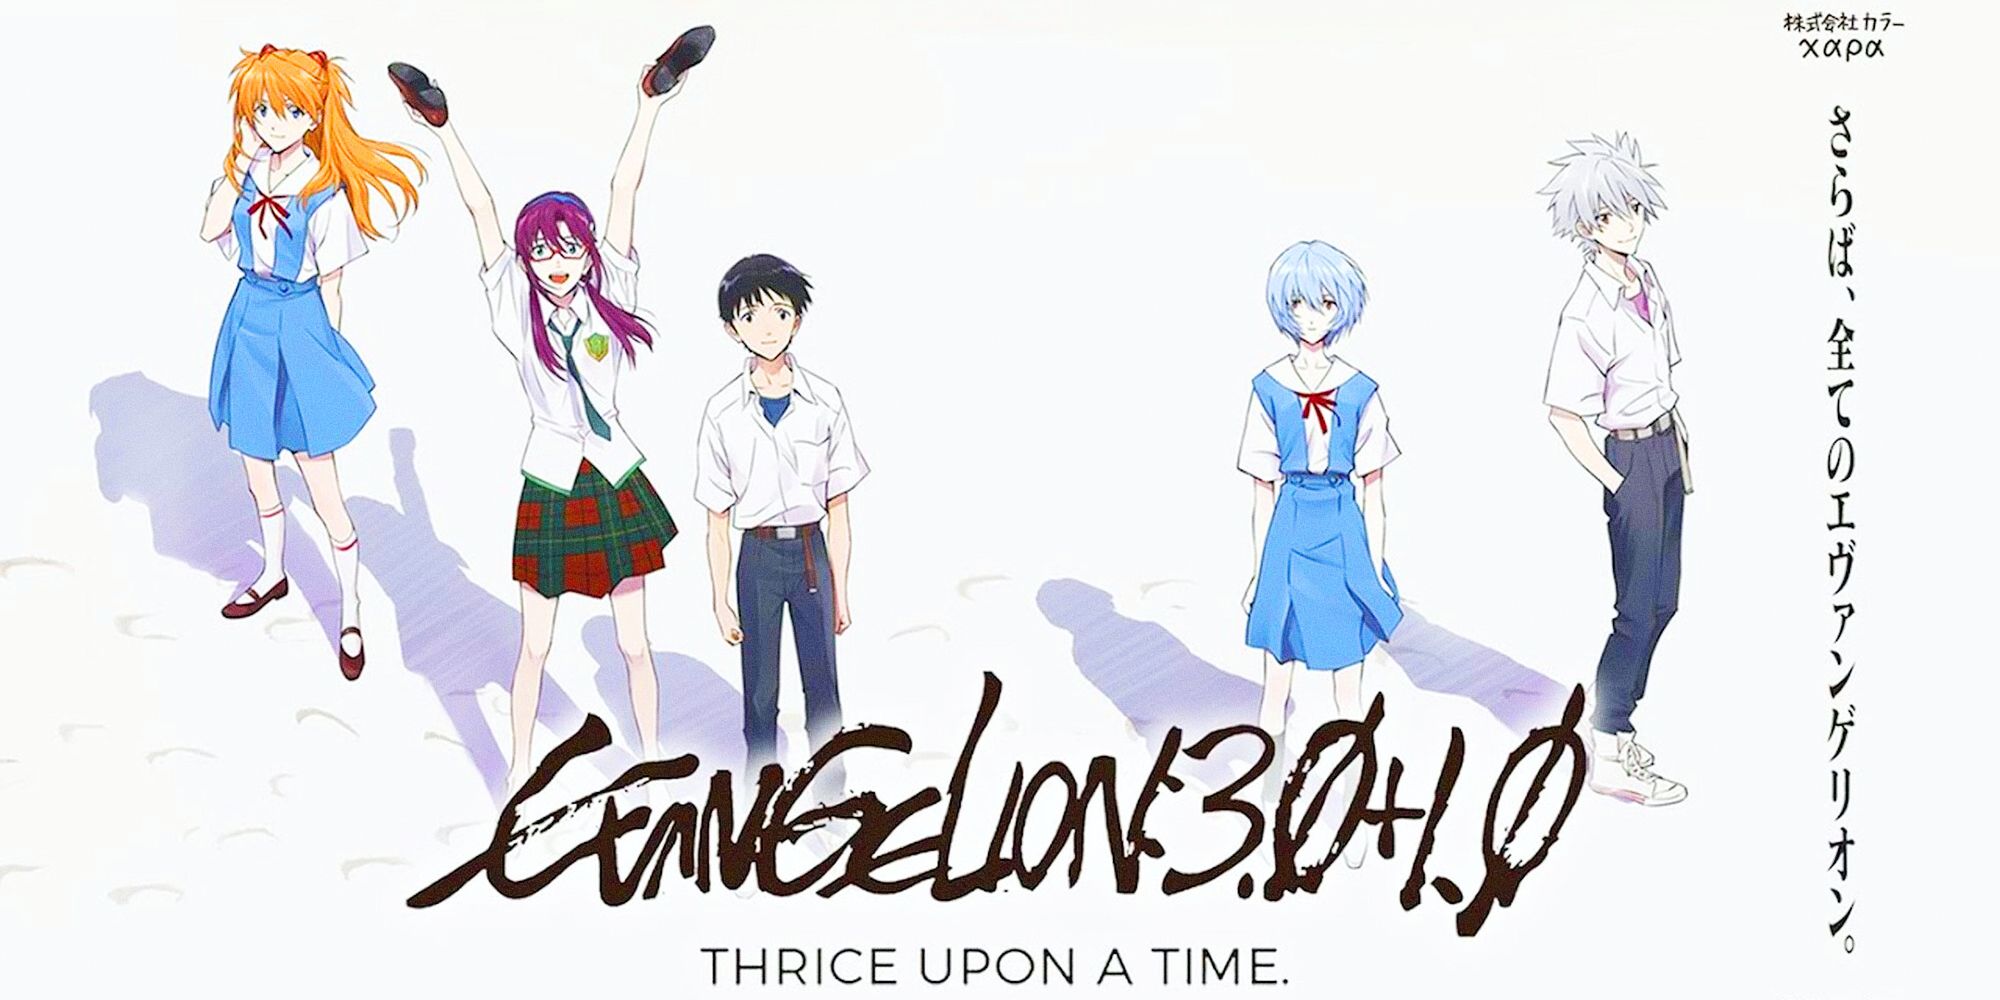 Evangelion 30101 thrice upon a time release date